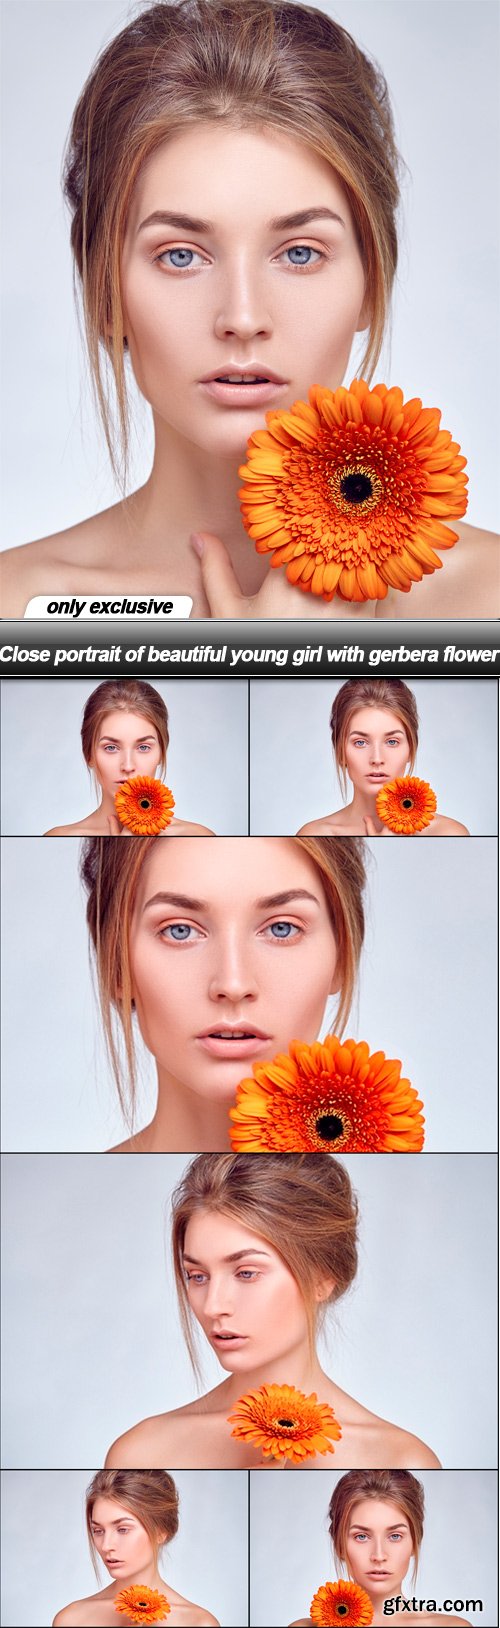 Close portrait of beautiful young girl with gerbera flower - 7 UHQ JPEG